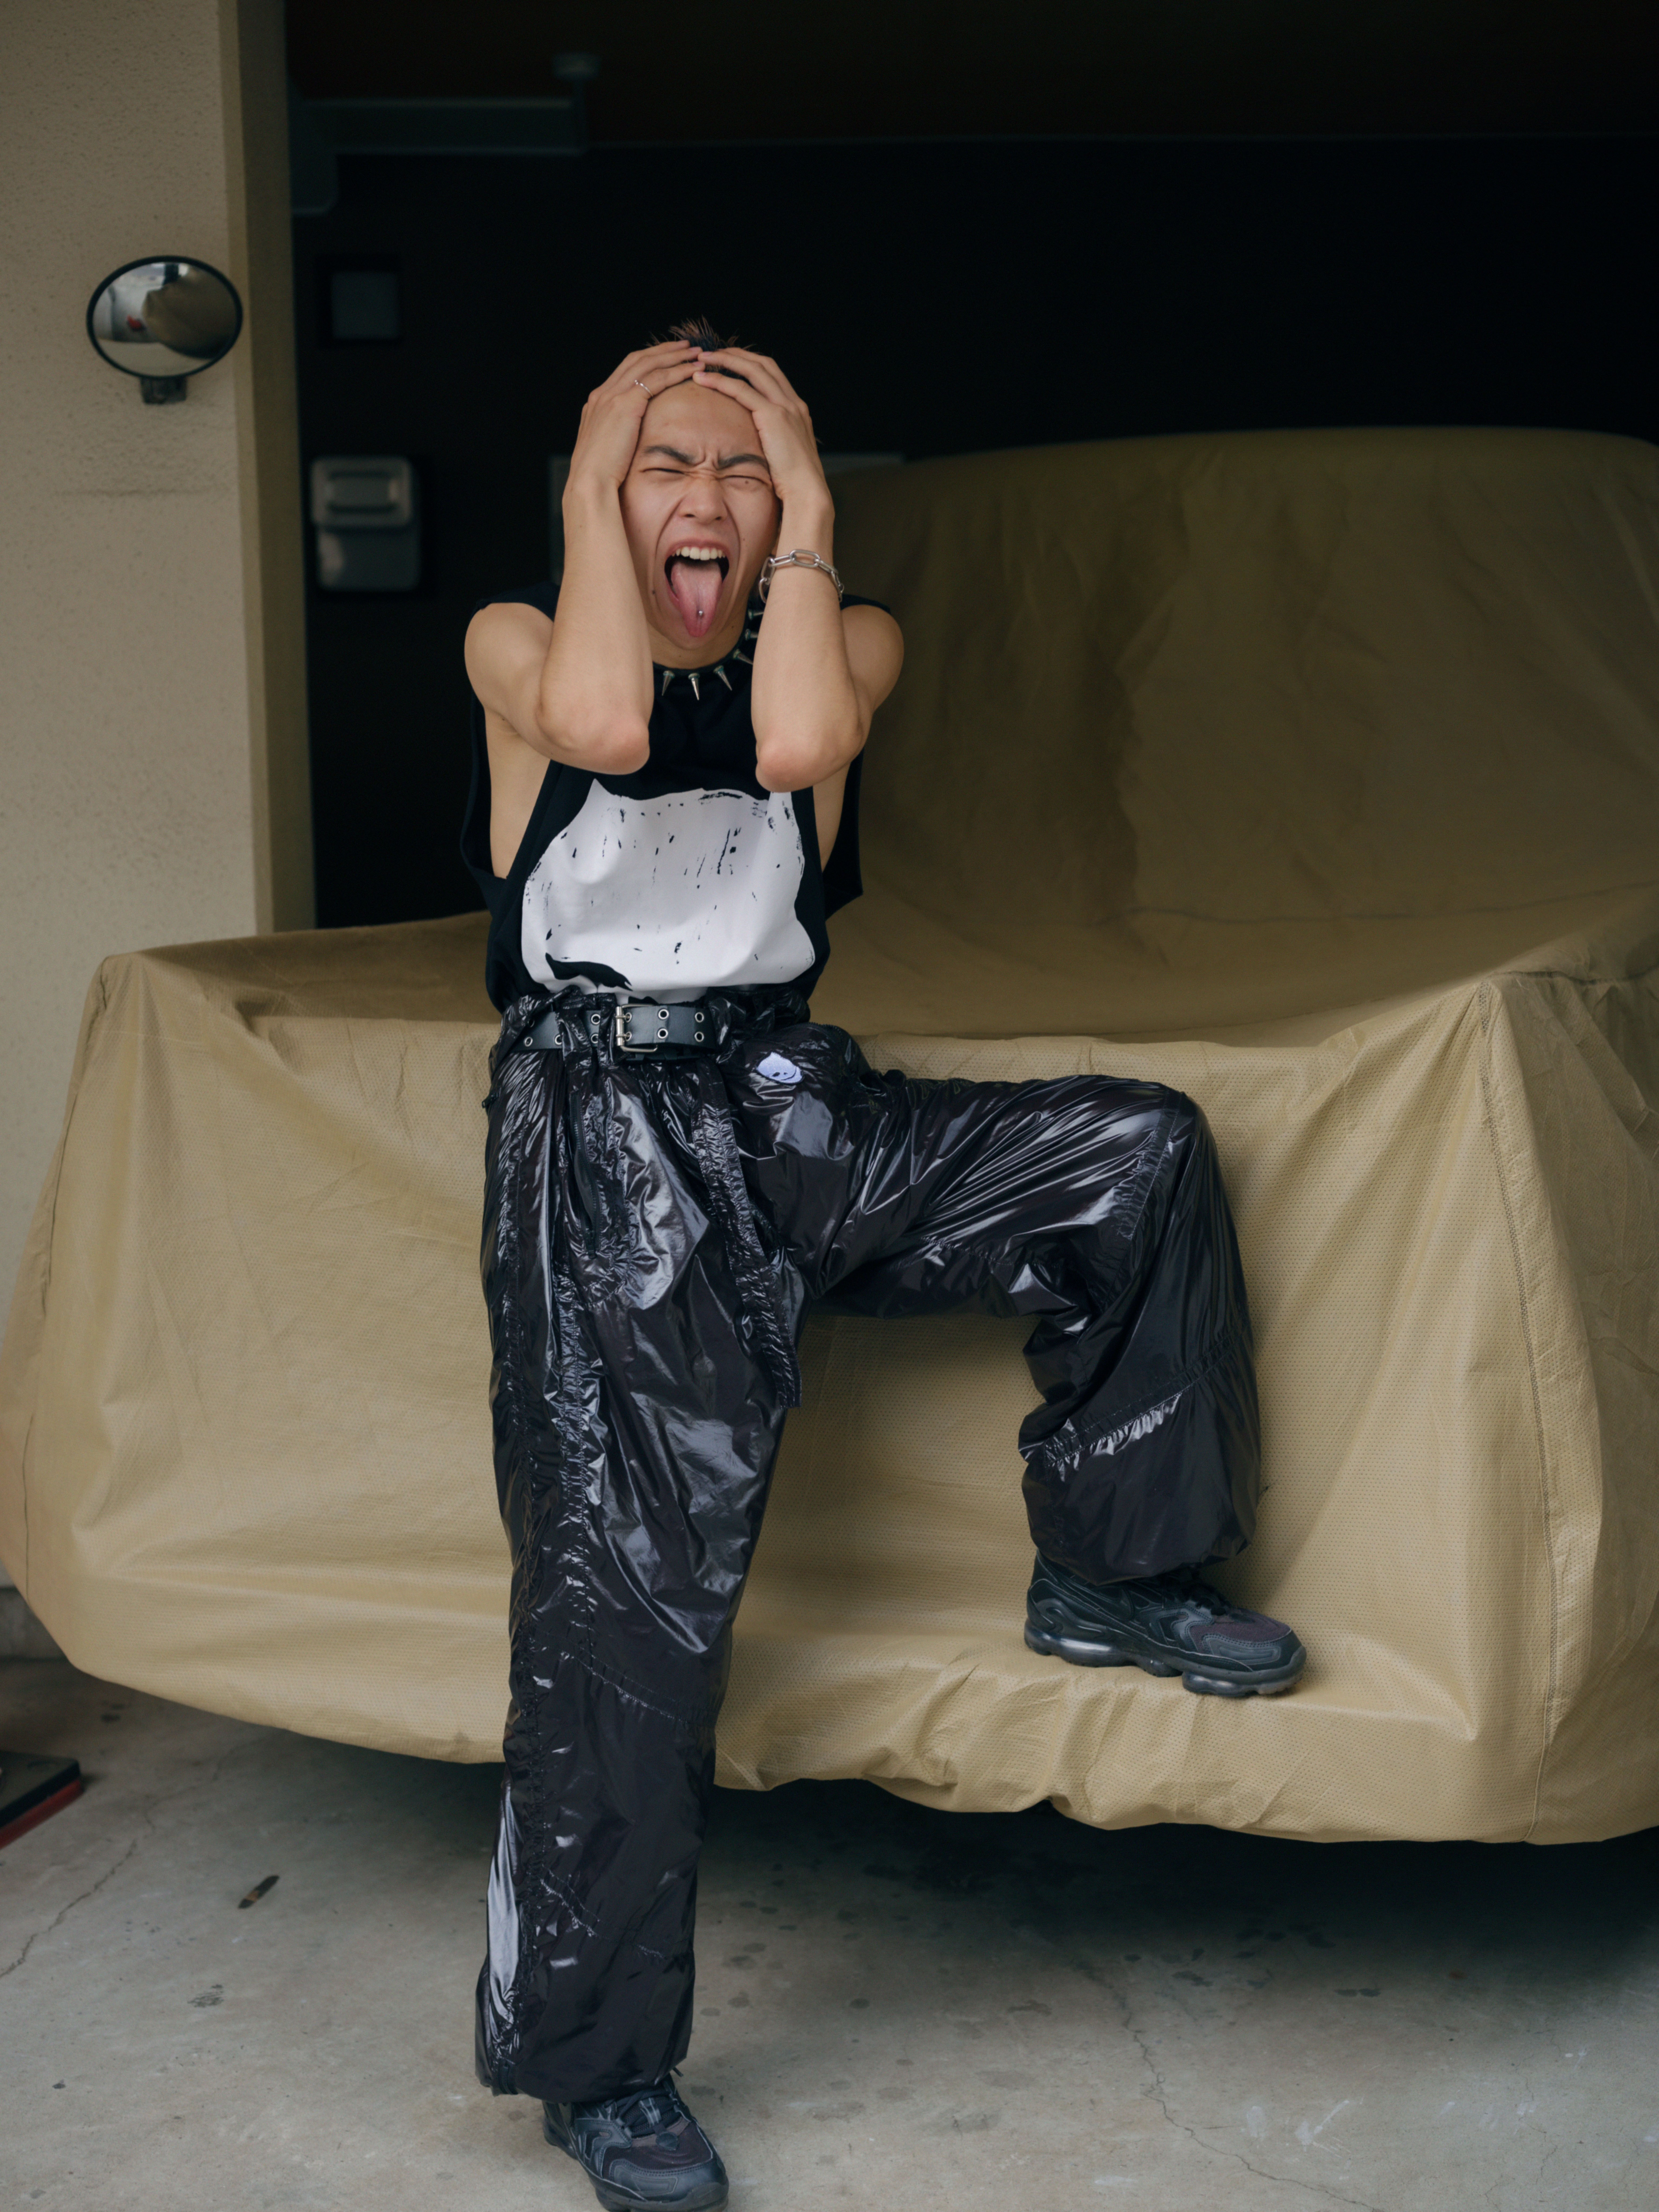 a person wearing shiny parachute trousers sticks their pierced tongue out to camera, with their head in their hands